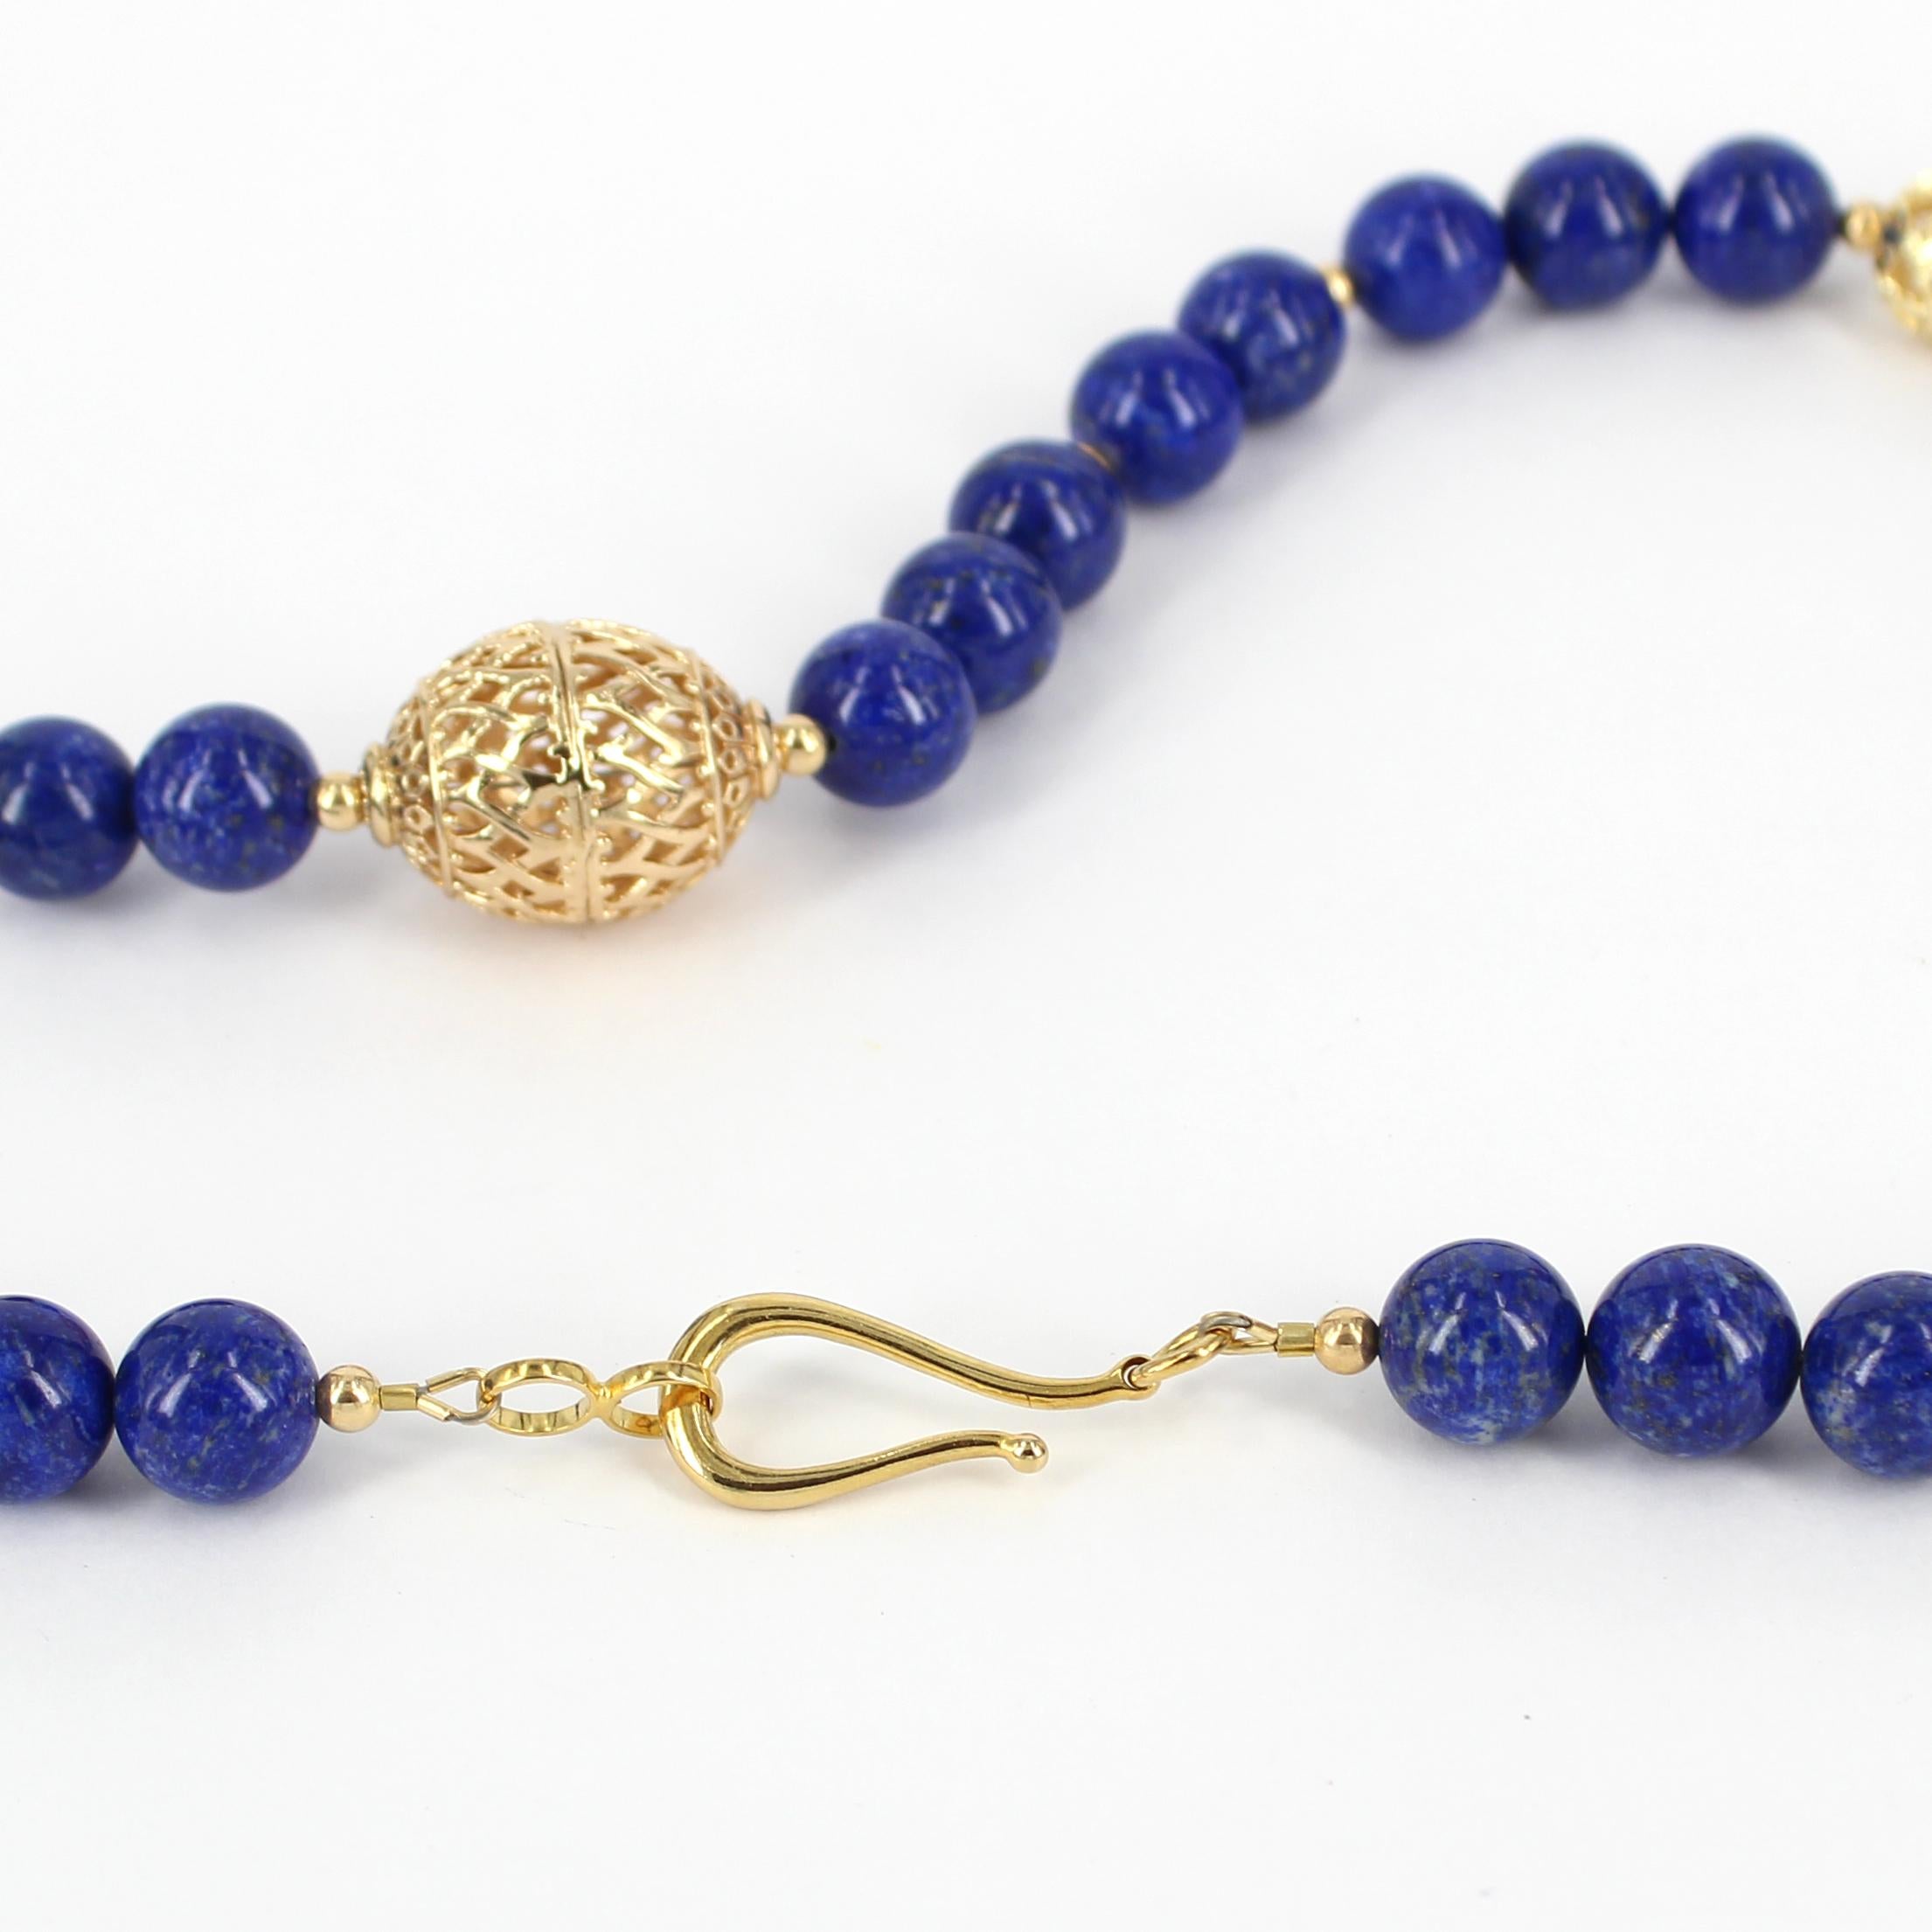 Dress to impress with this elegant statement piece, Natural high grade Lapis 12mm necklace features 33 polished beads, Gold filled filigree beads ranges, 4mm round, 12mm, round, 26x20mm oval, finished with Sterling Silver gold plated hook clasp.